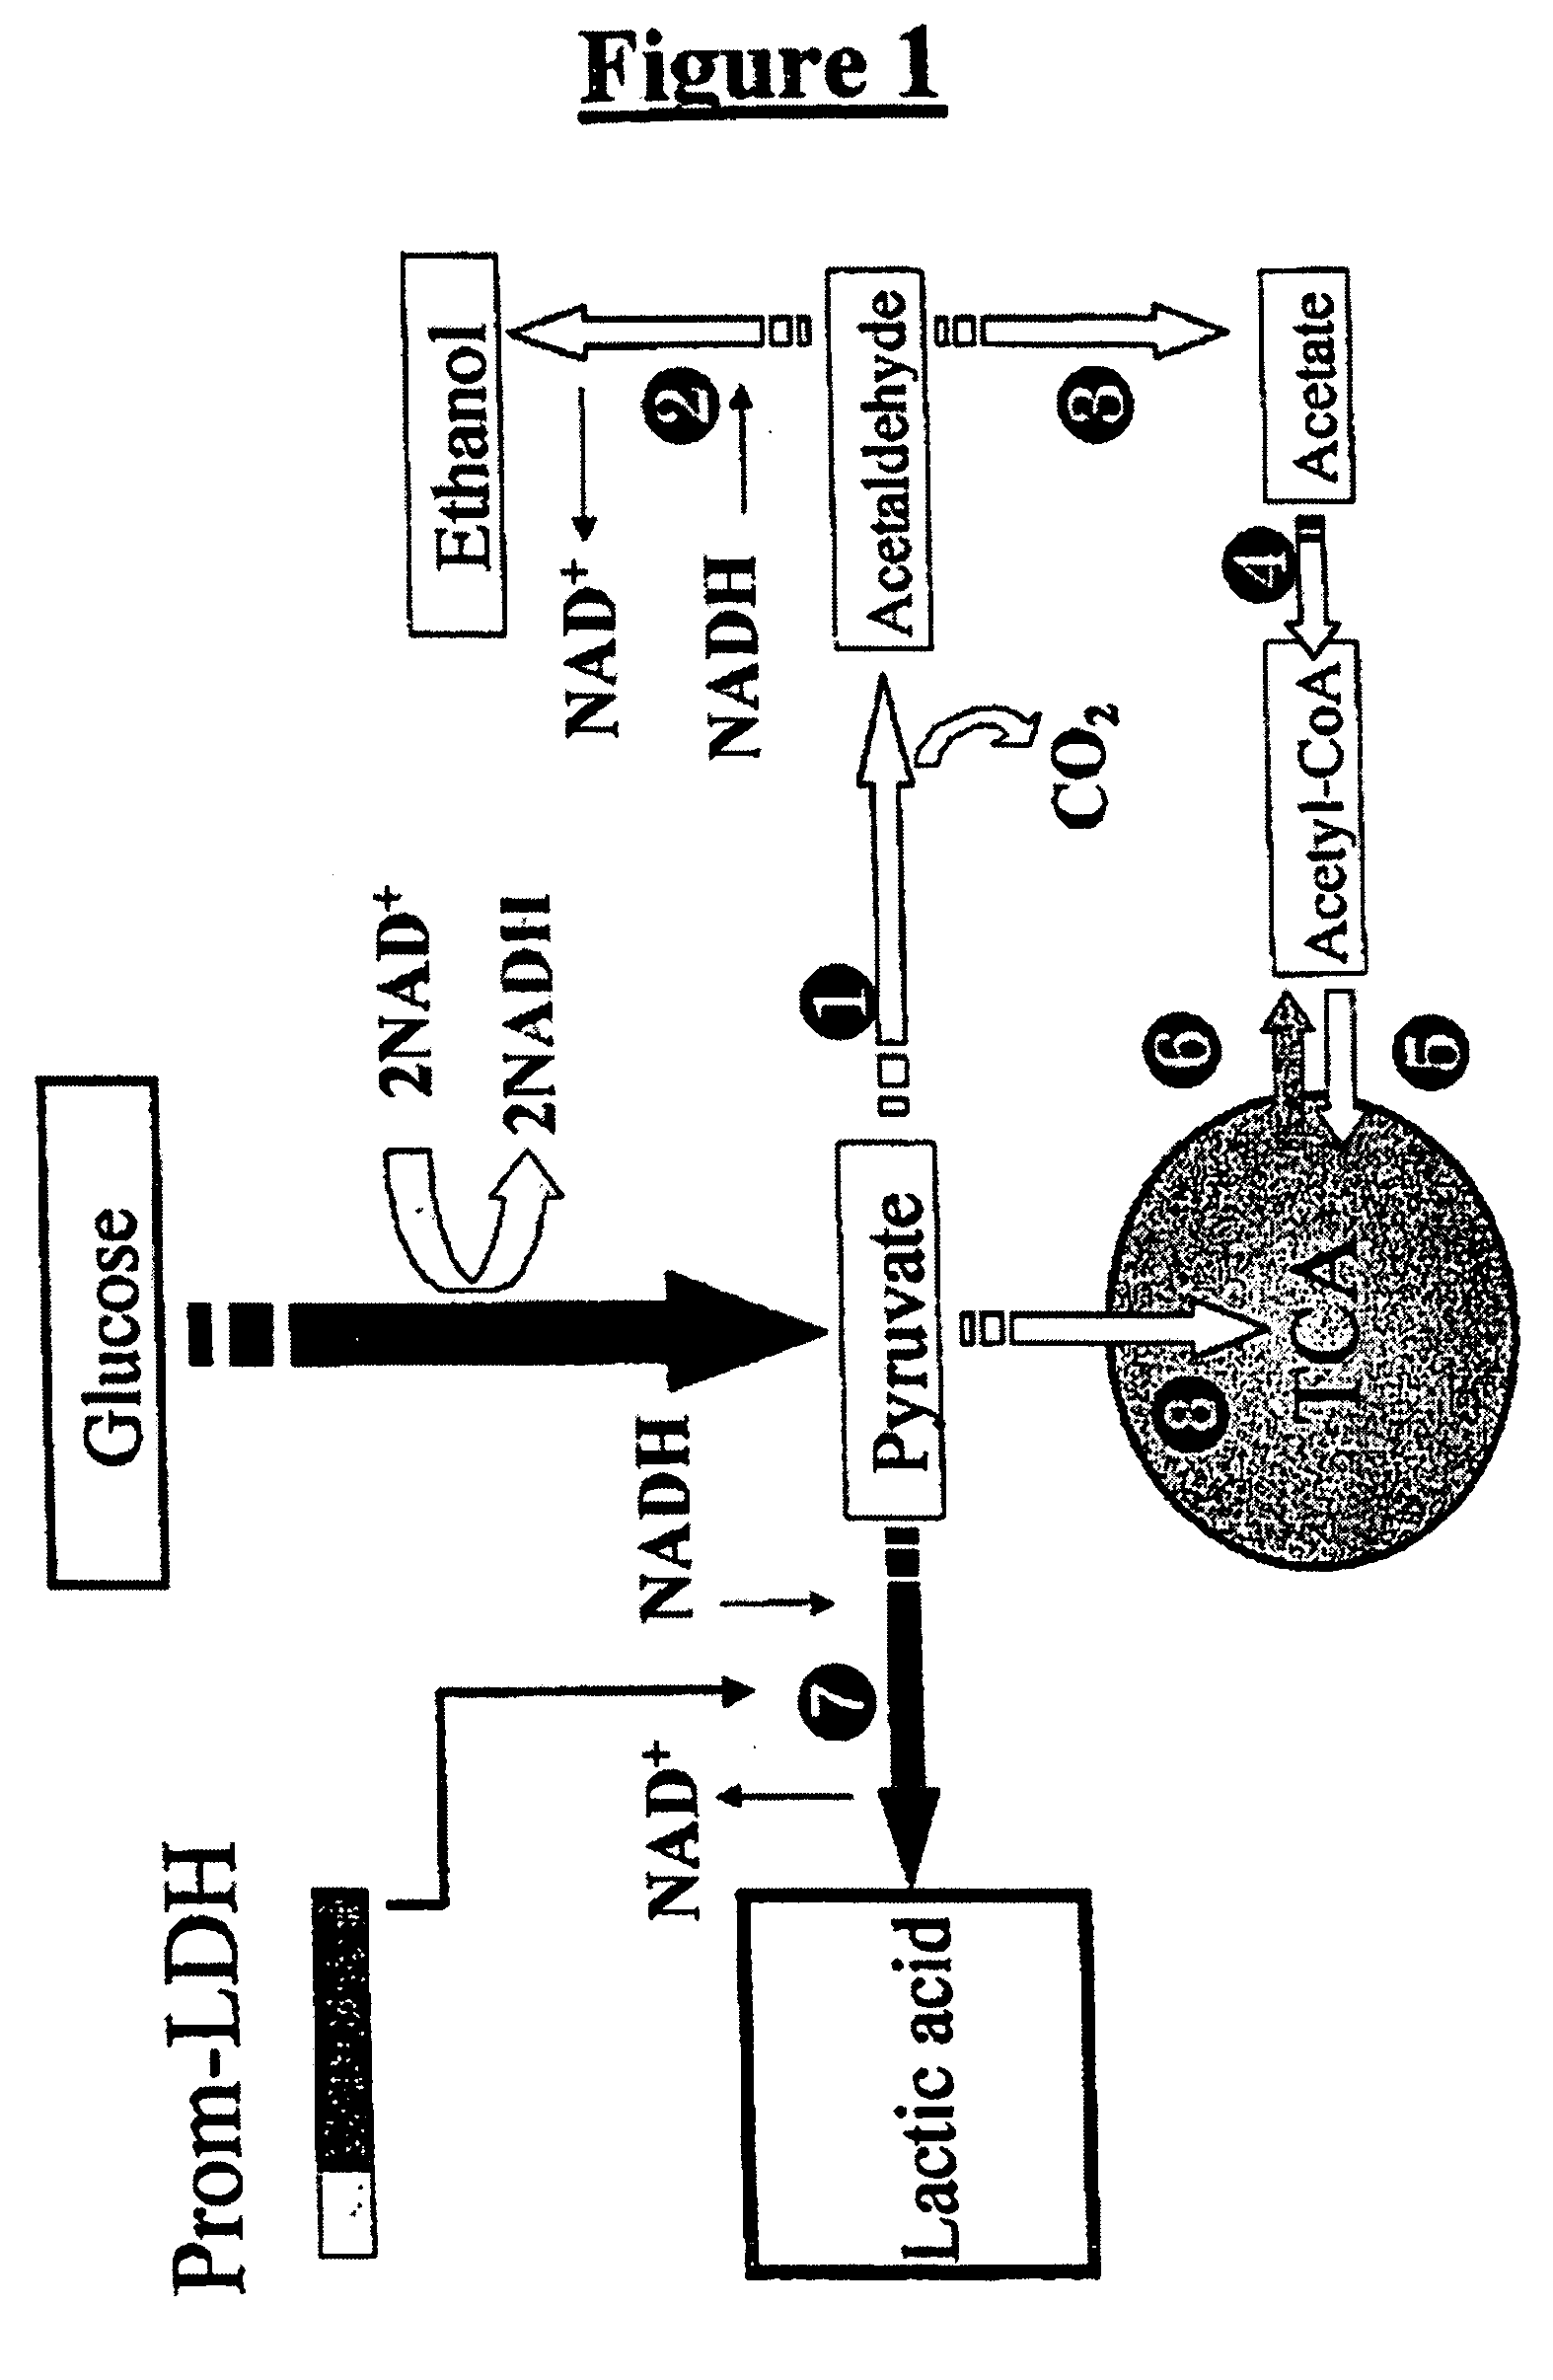 Production of D-lactic acid with yeast